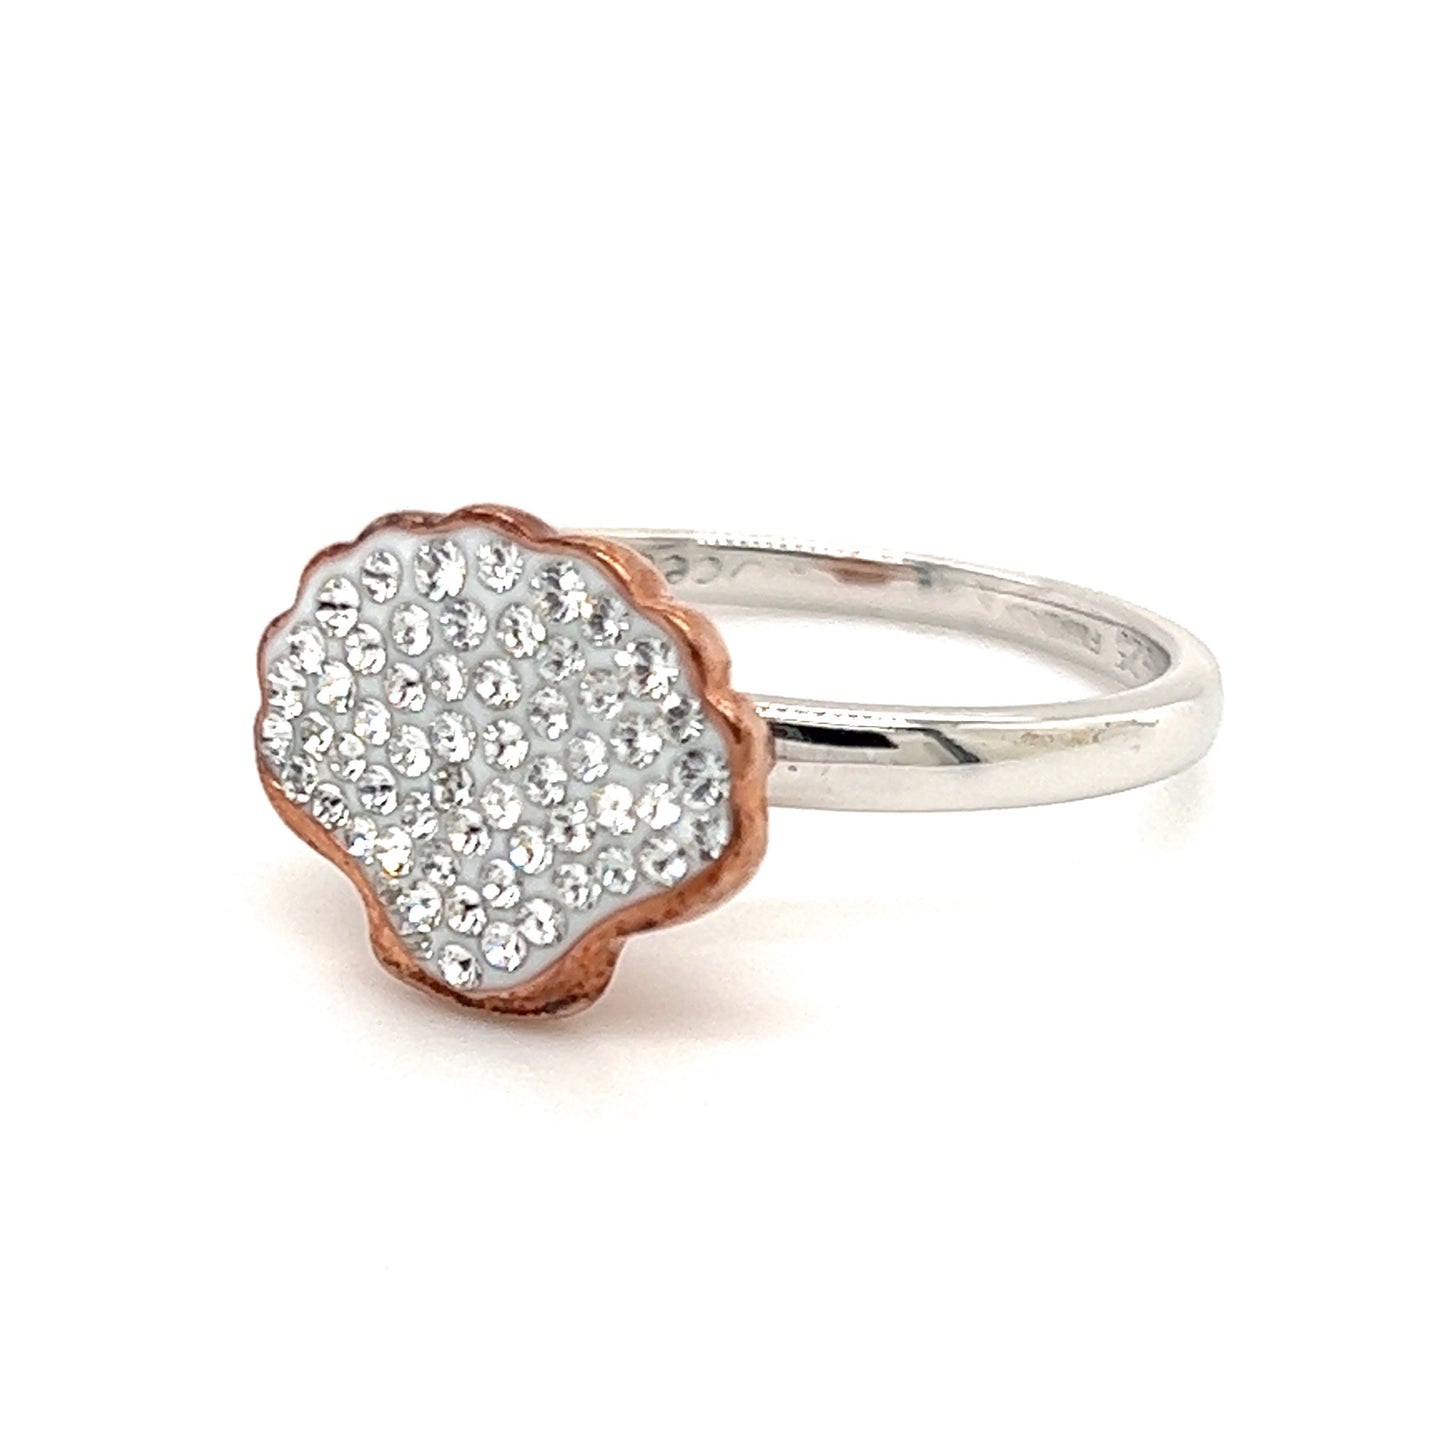 Shell Ring with Elegant Crystals in Sterling Silver and Rose Gold Accent